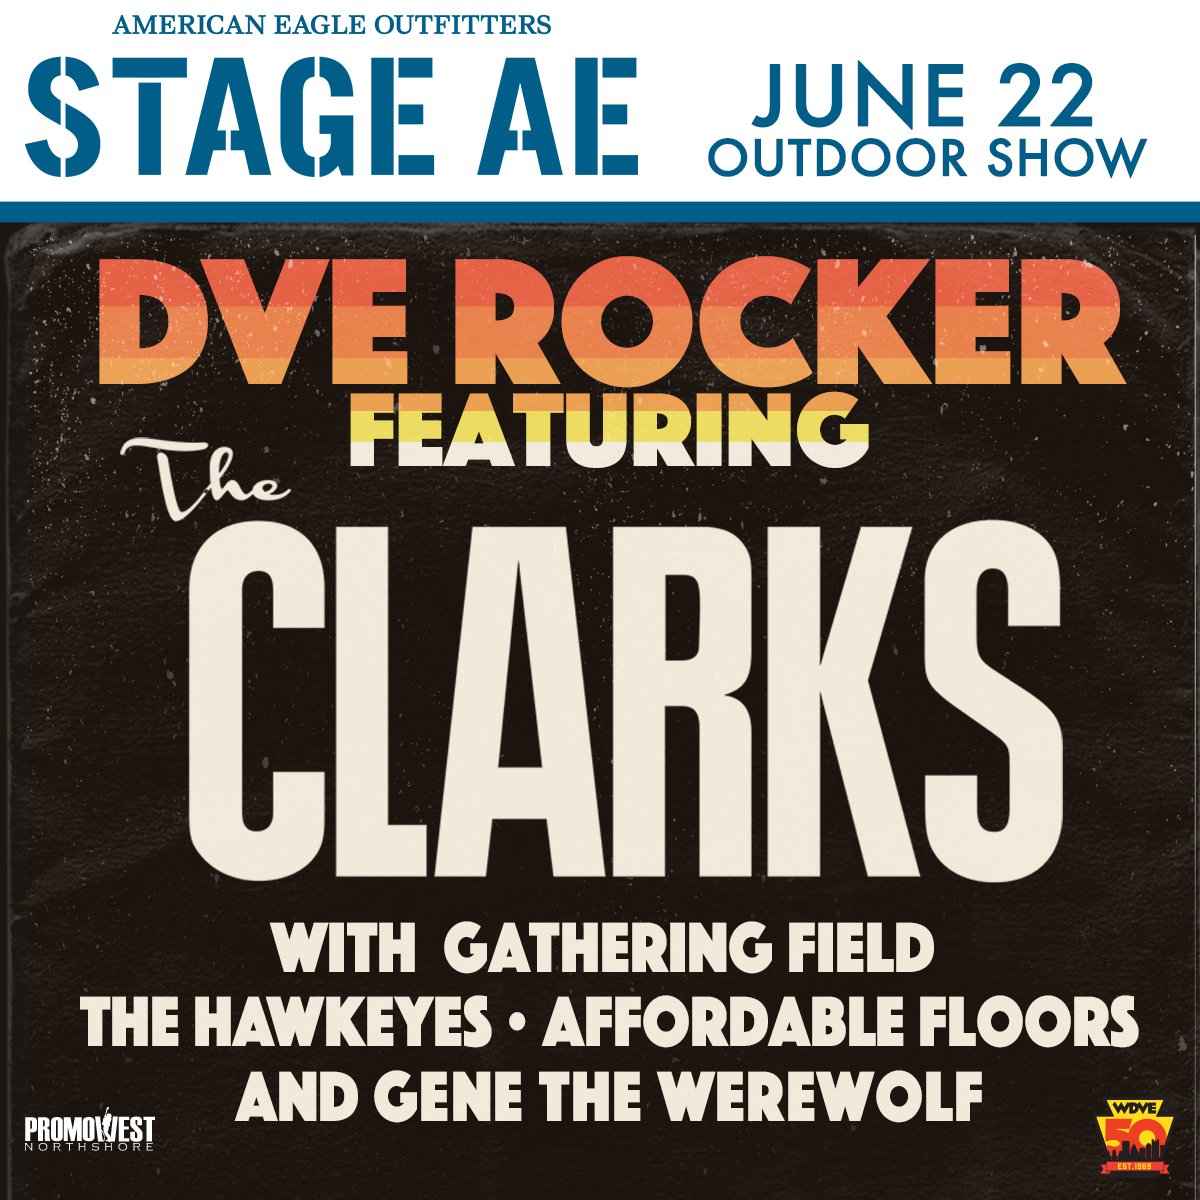 TONIGHT /  @DVERADIO Rocker featuring @theclarks with special guests  @gatheringfield @TheHawkeyes, Affordable Floors & @Genethewerewolf! Tickets are available at the box office and gates open at 5! Details: bit.ly/2IQC8go